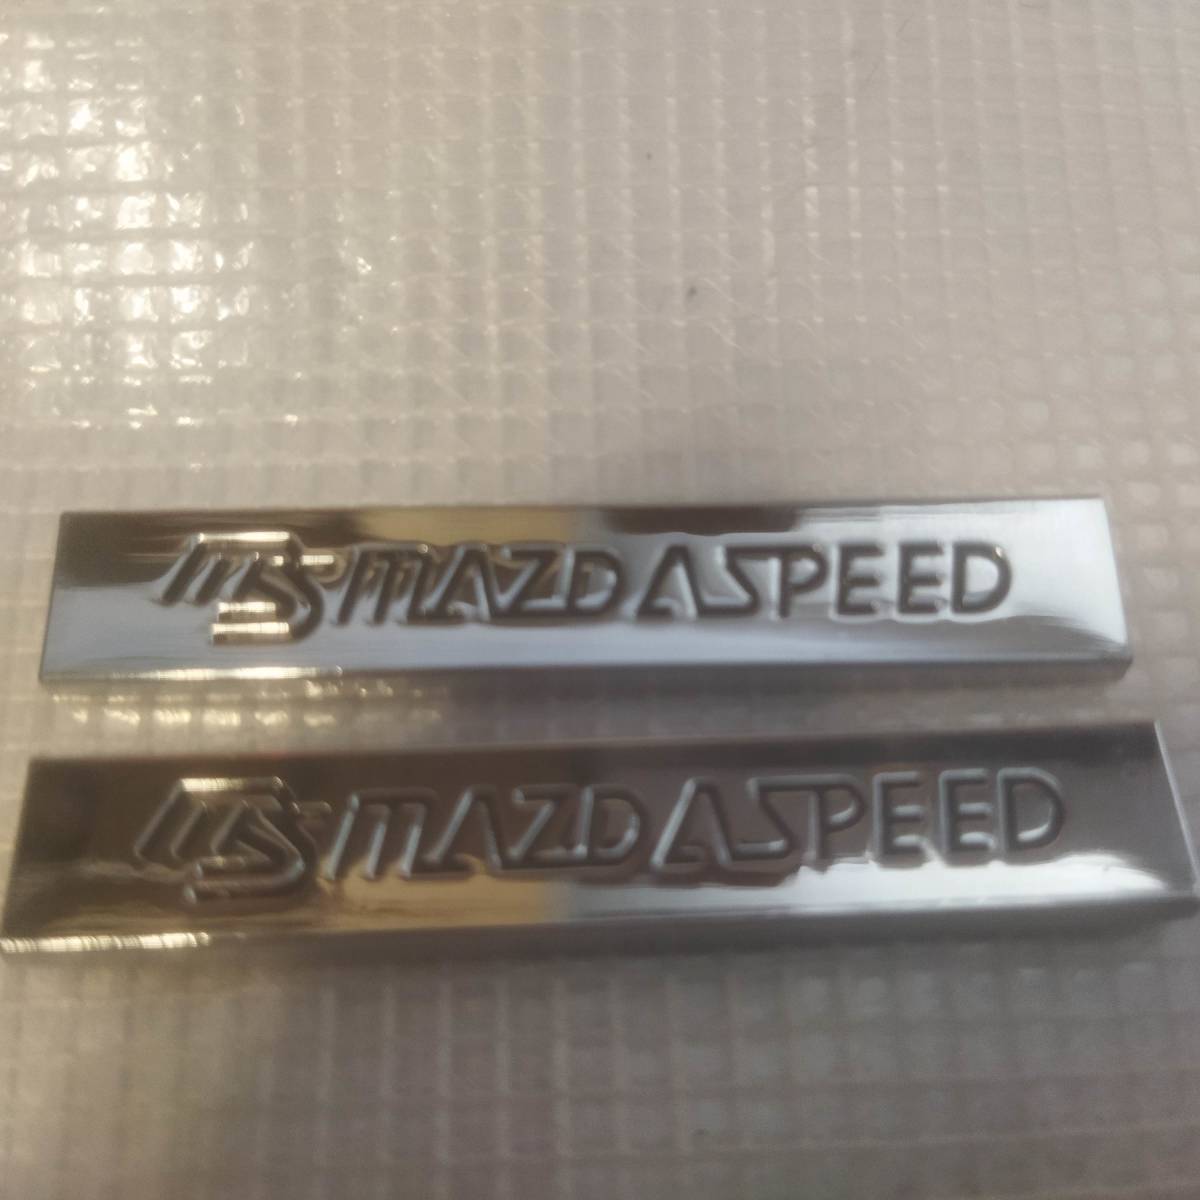 [ including carriage ]MAZDASPEED( Mazda Speed ) emblem plate length 1.0cm× width 6.0cm 2 sheets set made of metal Mazda 